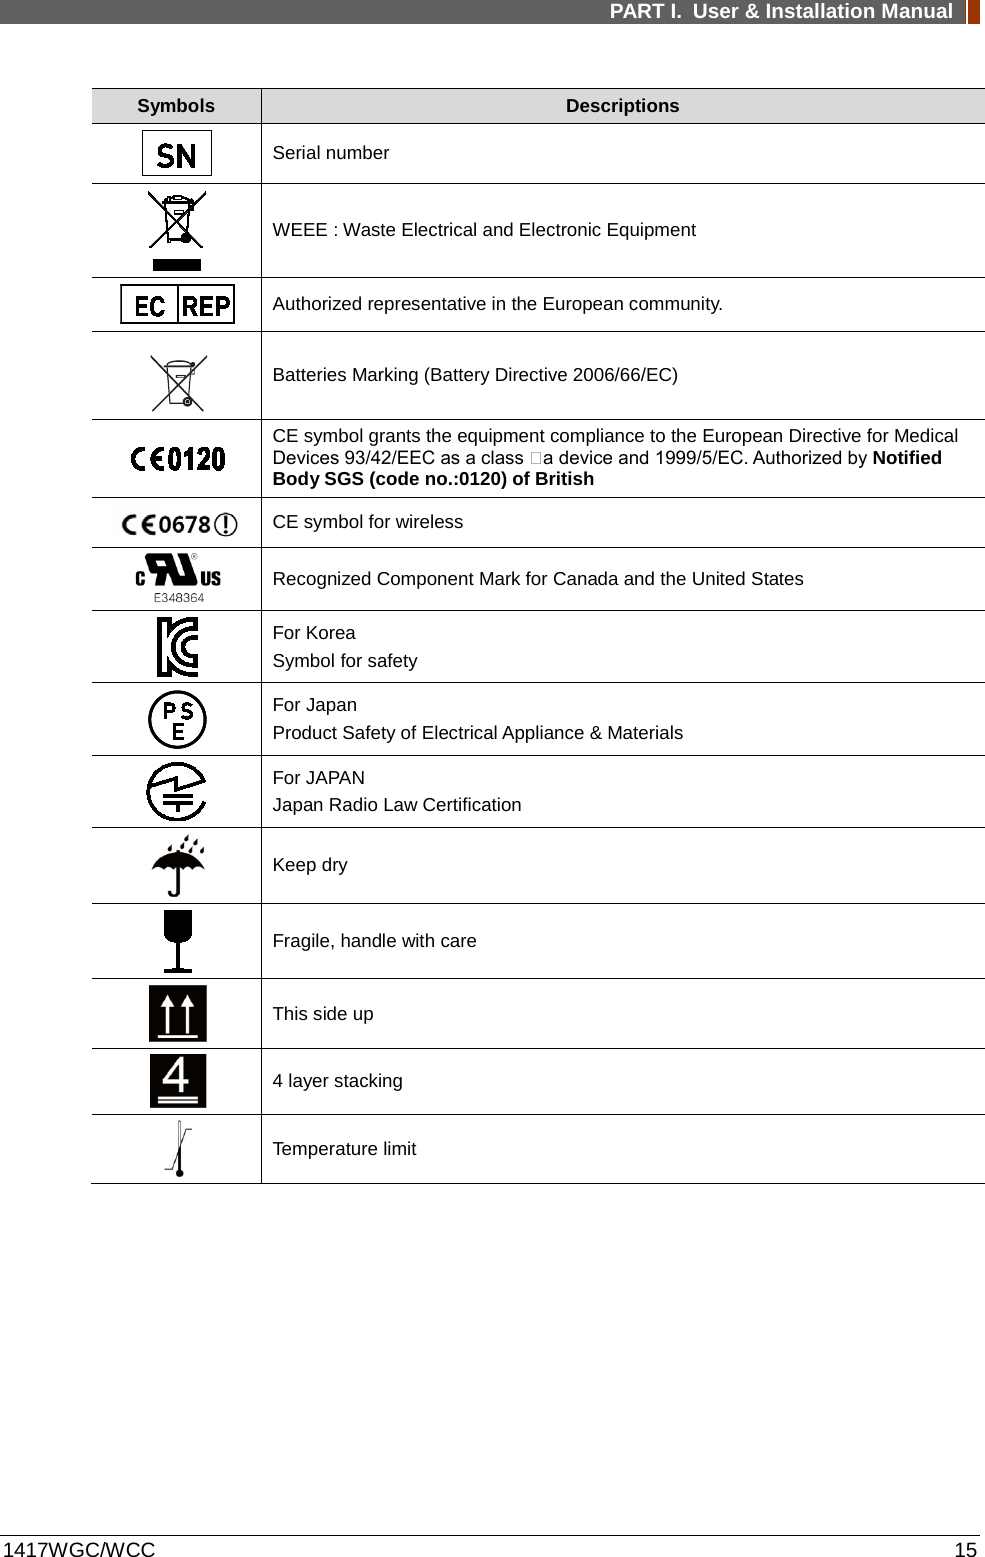 PART I. User &amp; Installation Manual  1417WGC/WCC 15 Symbols Descriptions  Serial number  WEEE : Waste Electrical and Electronic Equipment  Authorized representative in the European community.  Batteries Marking (Battery Directive 2006/66/EC)  CE symbol grants the equipment compliance to the European Directive for Medical Devices 93/42/EEC as a class �a device and 1999/5/EC. Authorized by Notified Body SGS (code no.:0120) of British    CE symbol for wireless  Recognized Component Mark for Canada and the United States  For Korea Symbol for safety  For Japan Product Safety of Electrical Appliance &amp; Materials  For JAPAN Japan Radio Law Certification  Keep dry  Fragile, handle with care  This side up  4 layer stacking  Temperature limit       